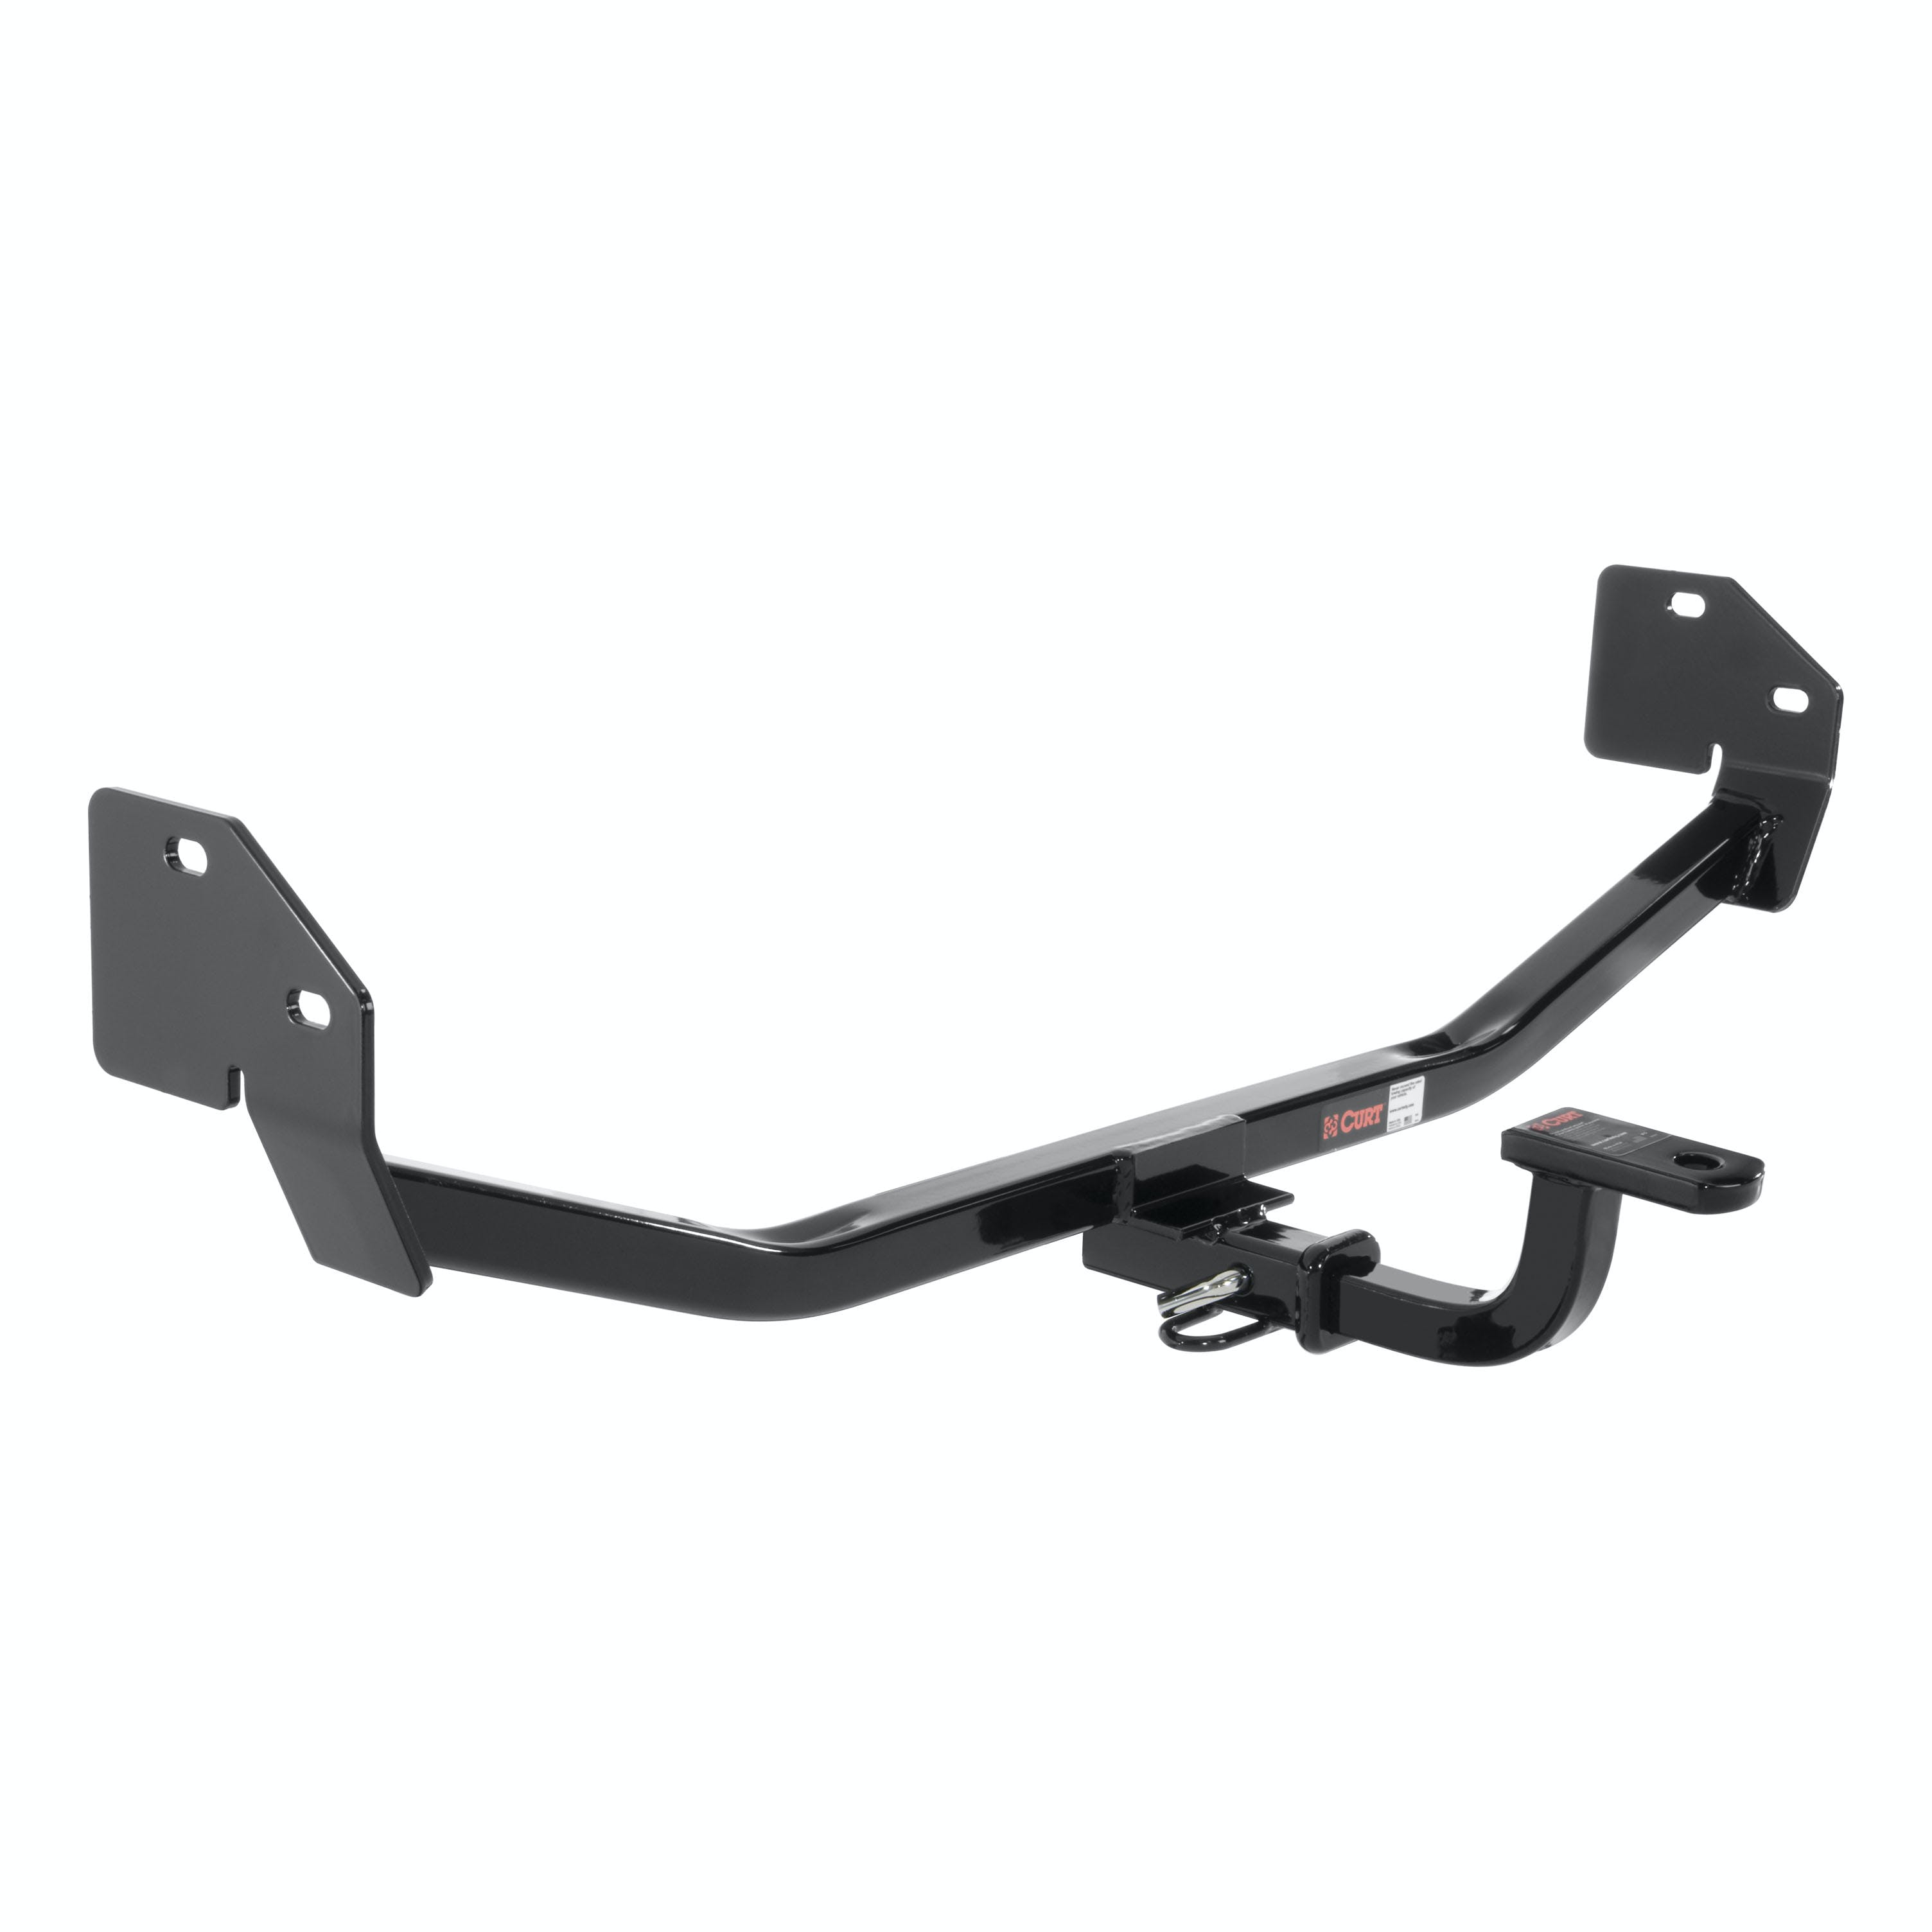 CURT 112103 Class 1 Trailer Hitch, 1-1/4 Ball Mount, Select Ford Mustang